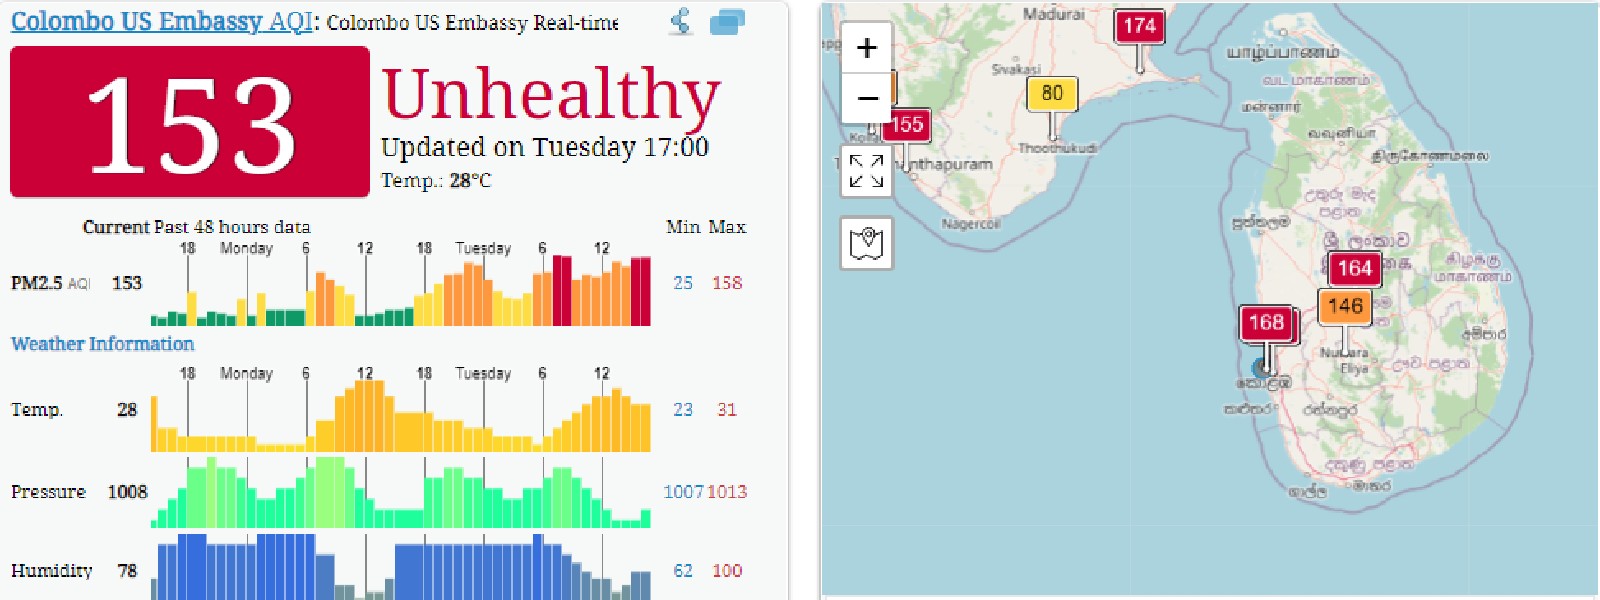 Air Pollution in Colombo hits an unhealthy level